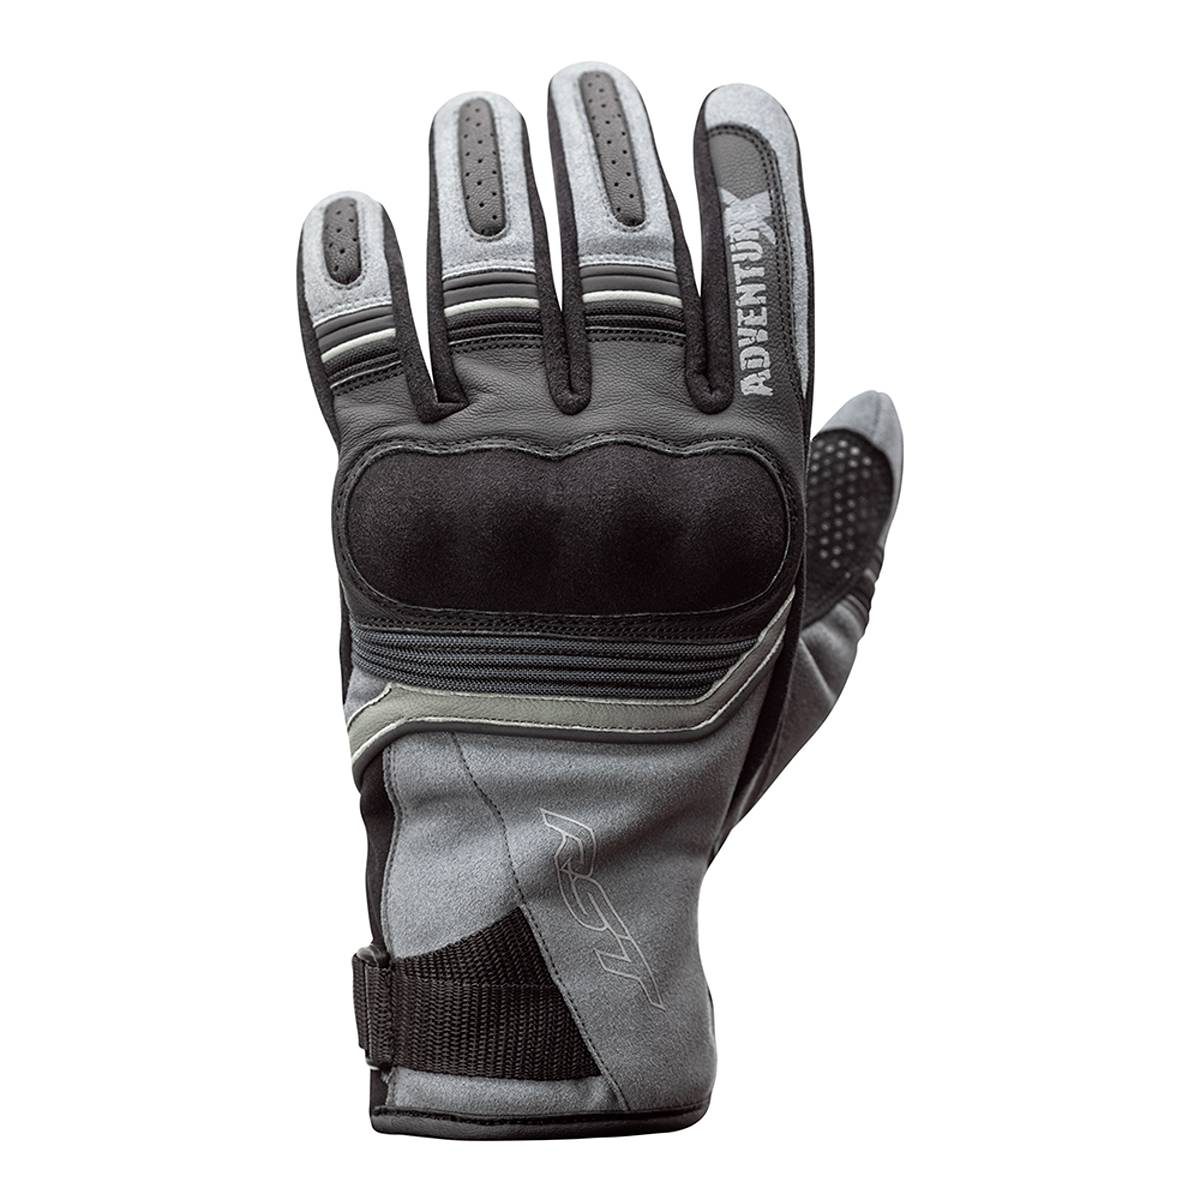 Image of EU RST Adventure-X Gloves Grey Black Taille 8